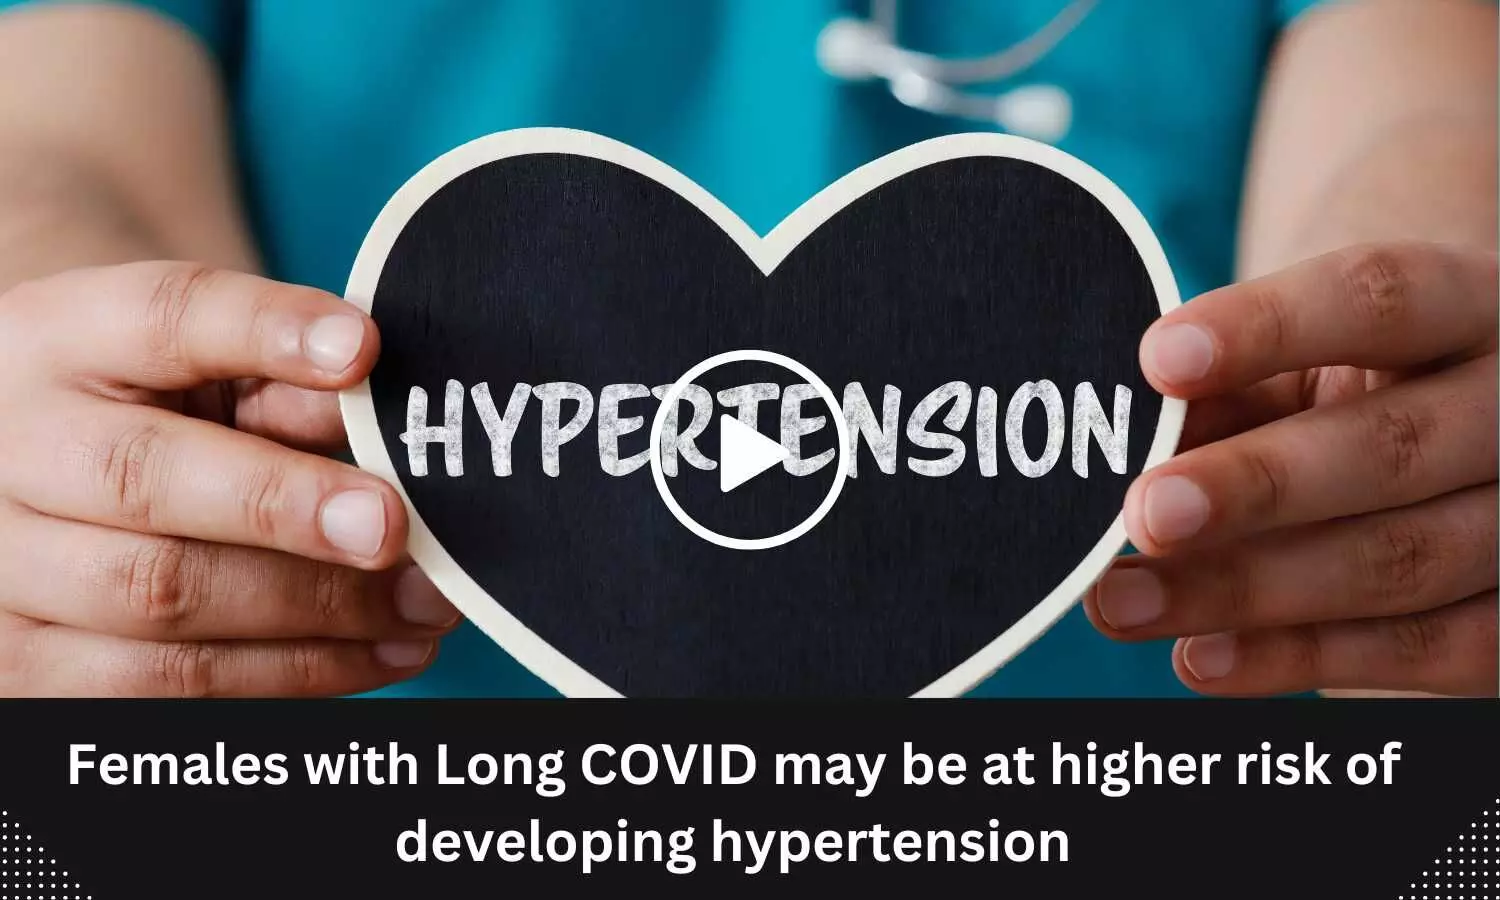 Females with Long COVID may be at higher risk of developing hypertension